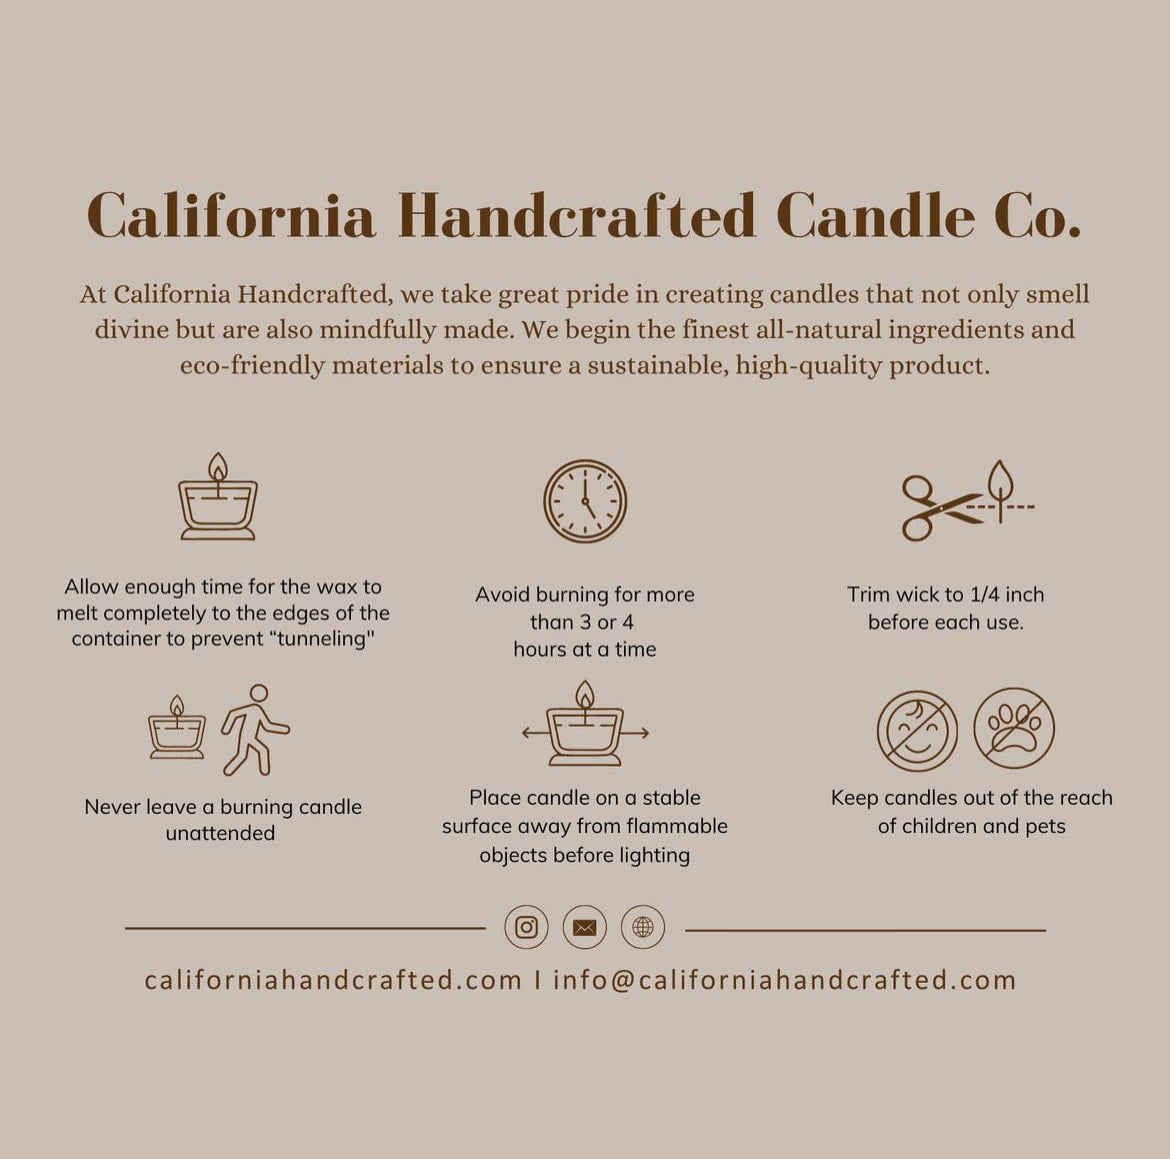 California Poppies Signature Scent Soy Travel Candle